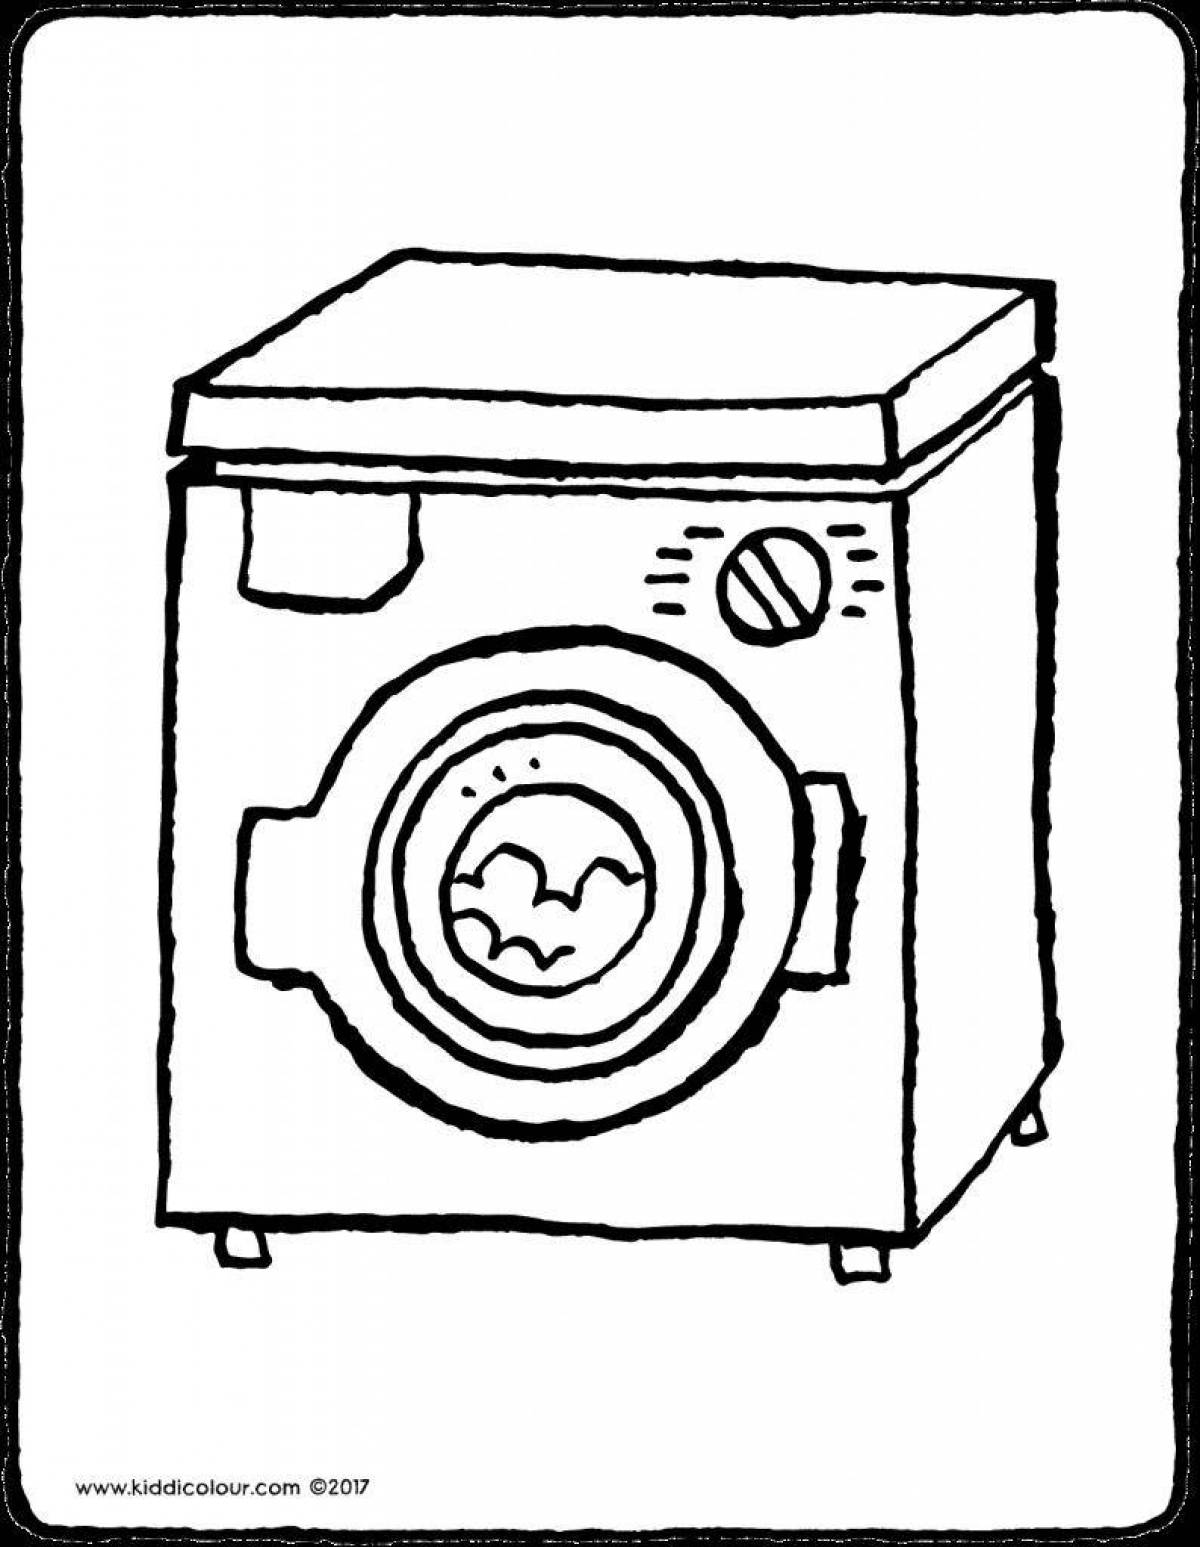 Creative washing machine coloring page for toddlers